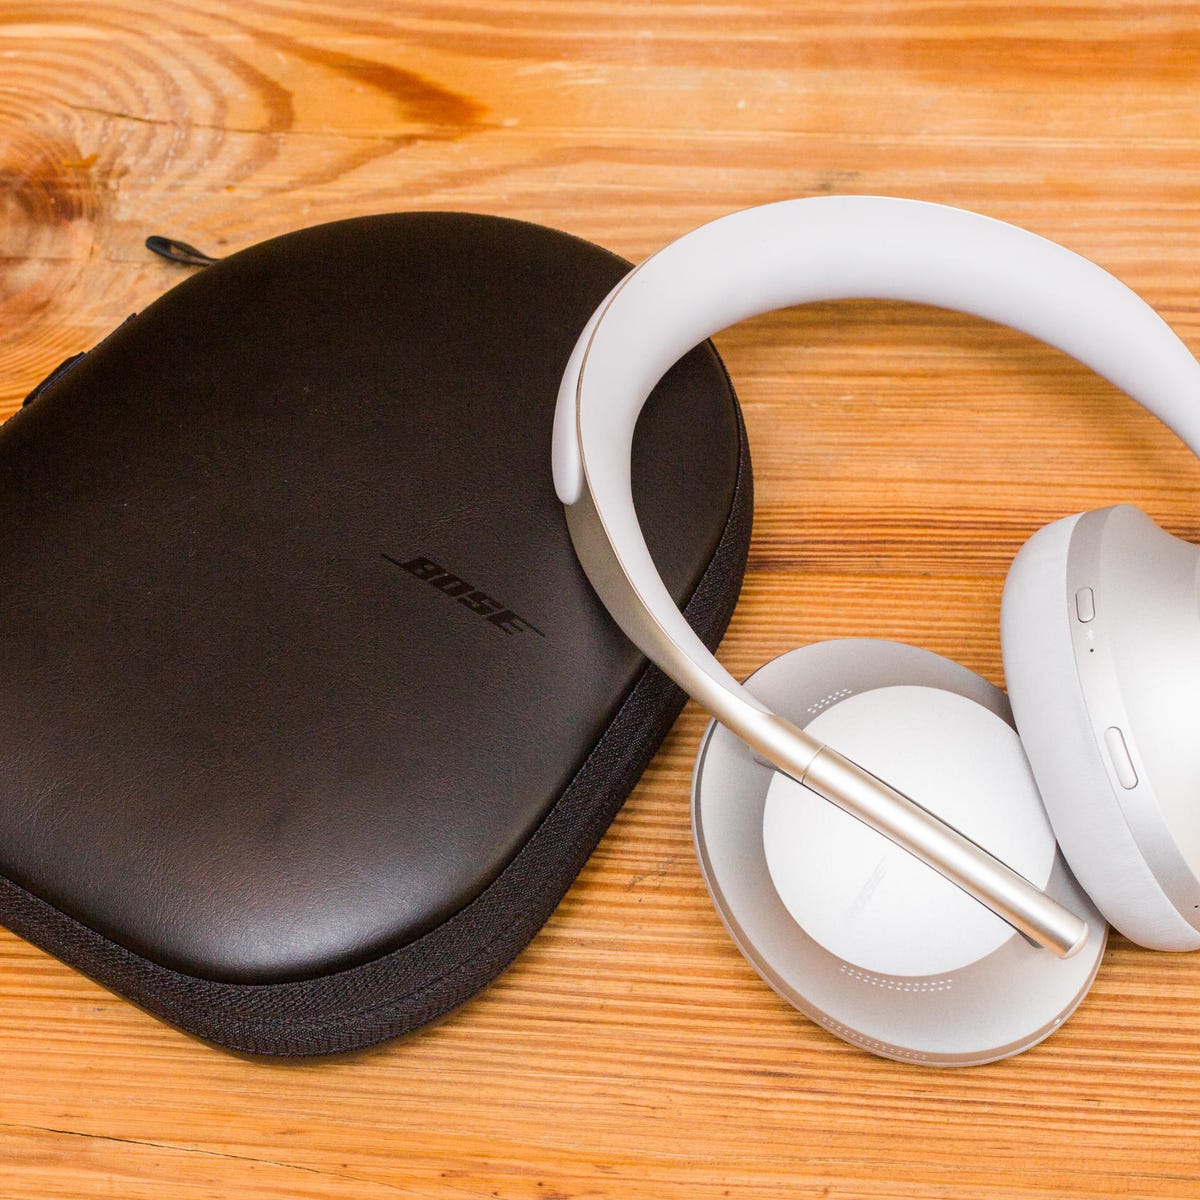 Get the excellent Bose Noise Cancelling 700 for $100 off - CNET